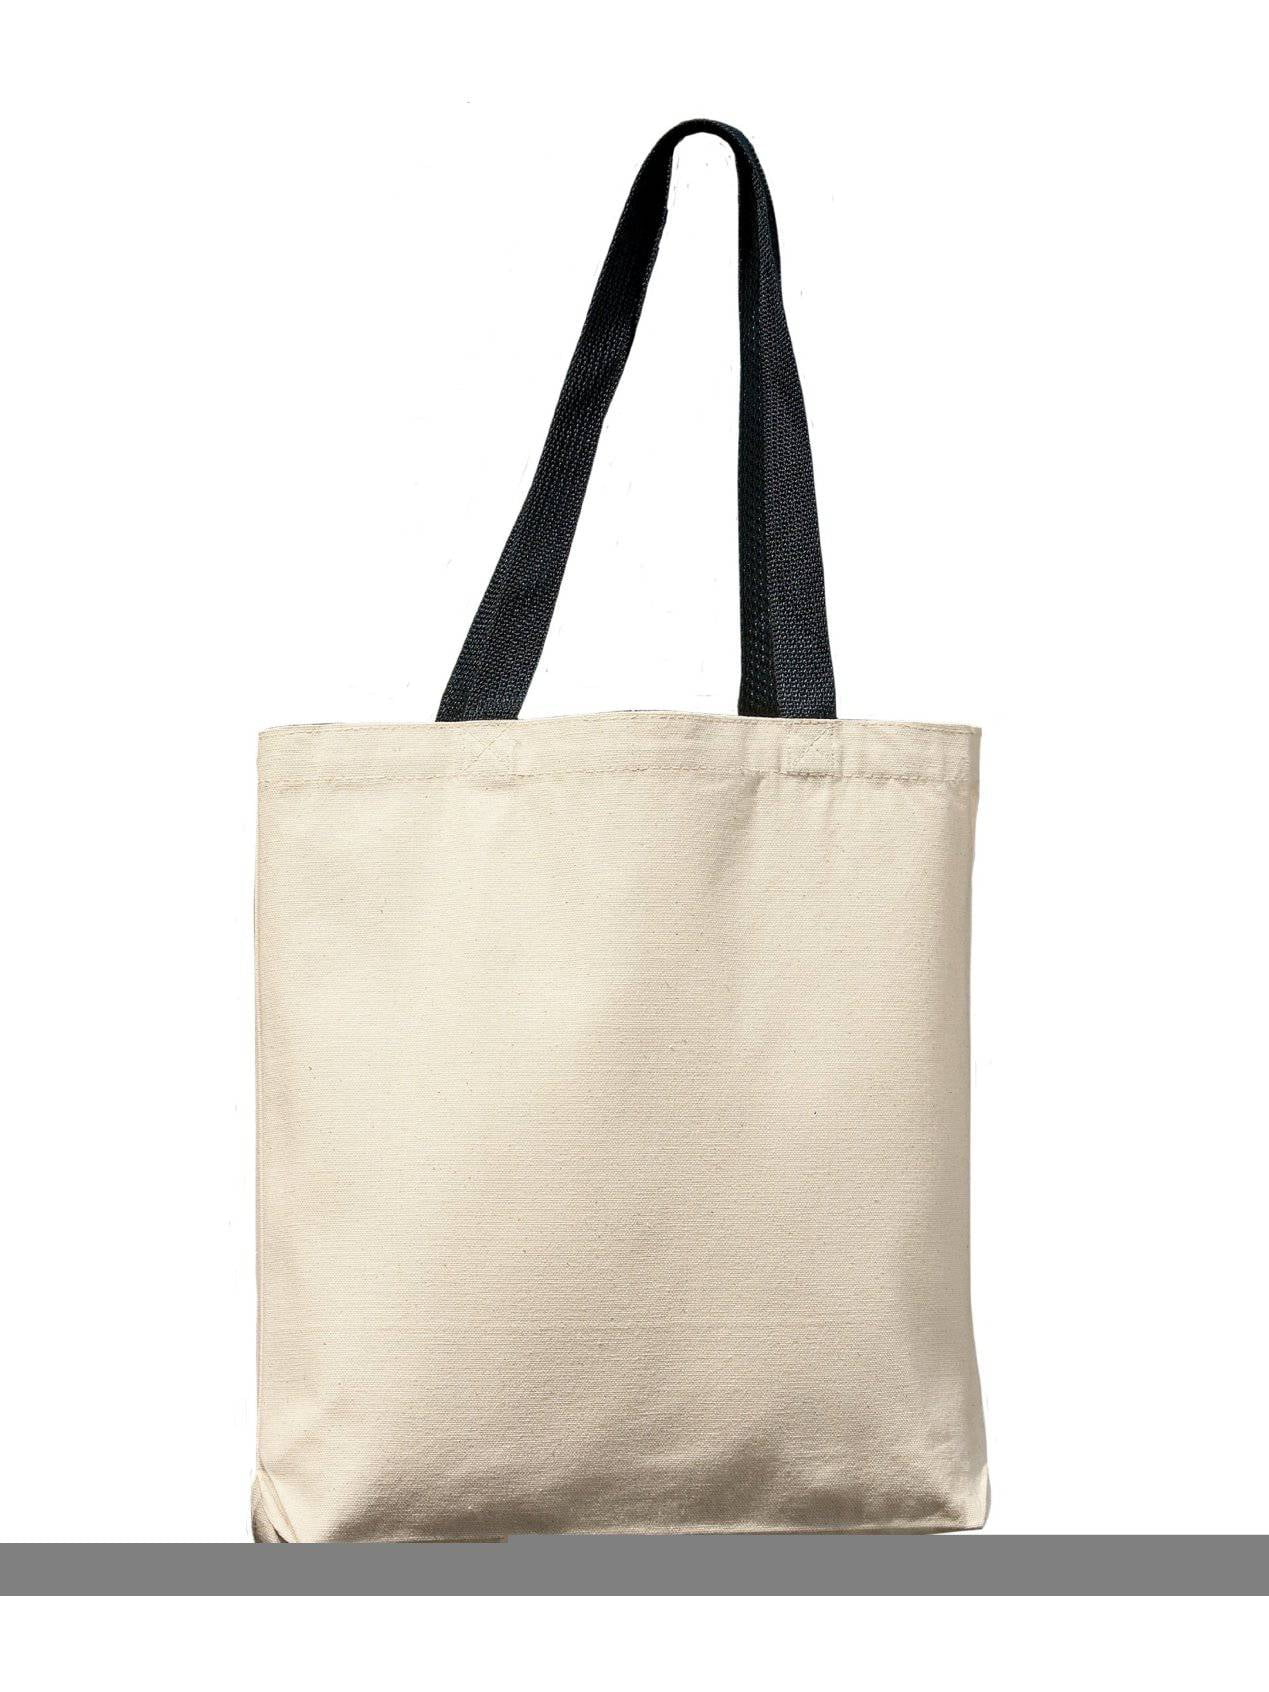 Liberty Bags Gusseted 10 Ounce Natural Tote Bag Natural w/ Black ...